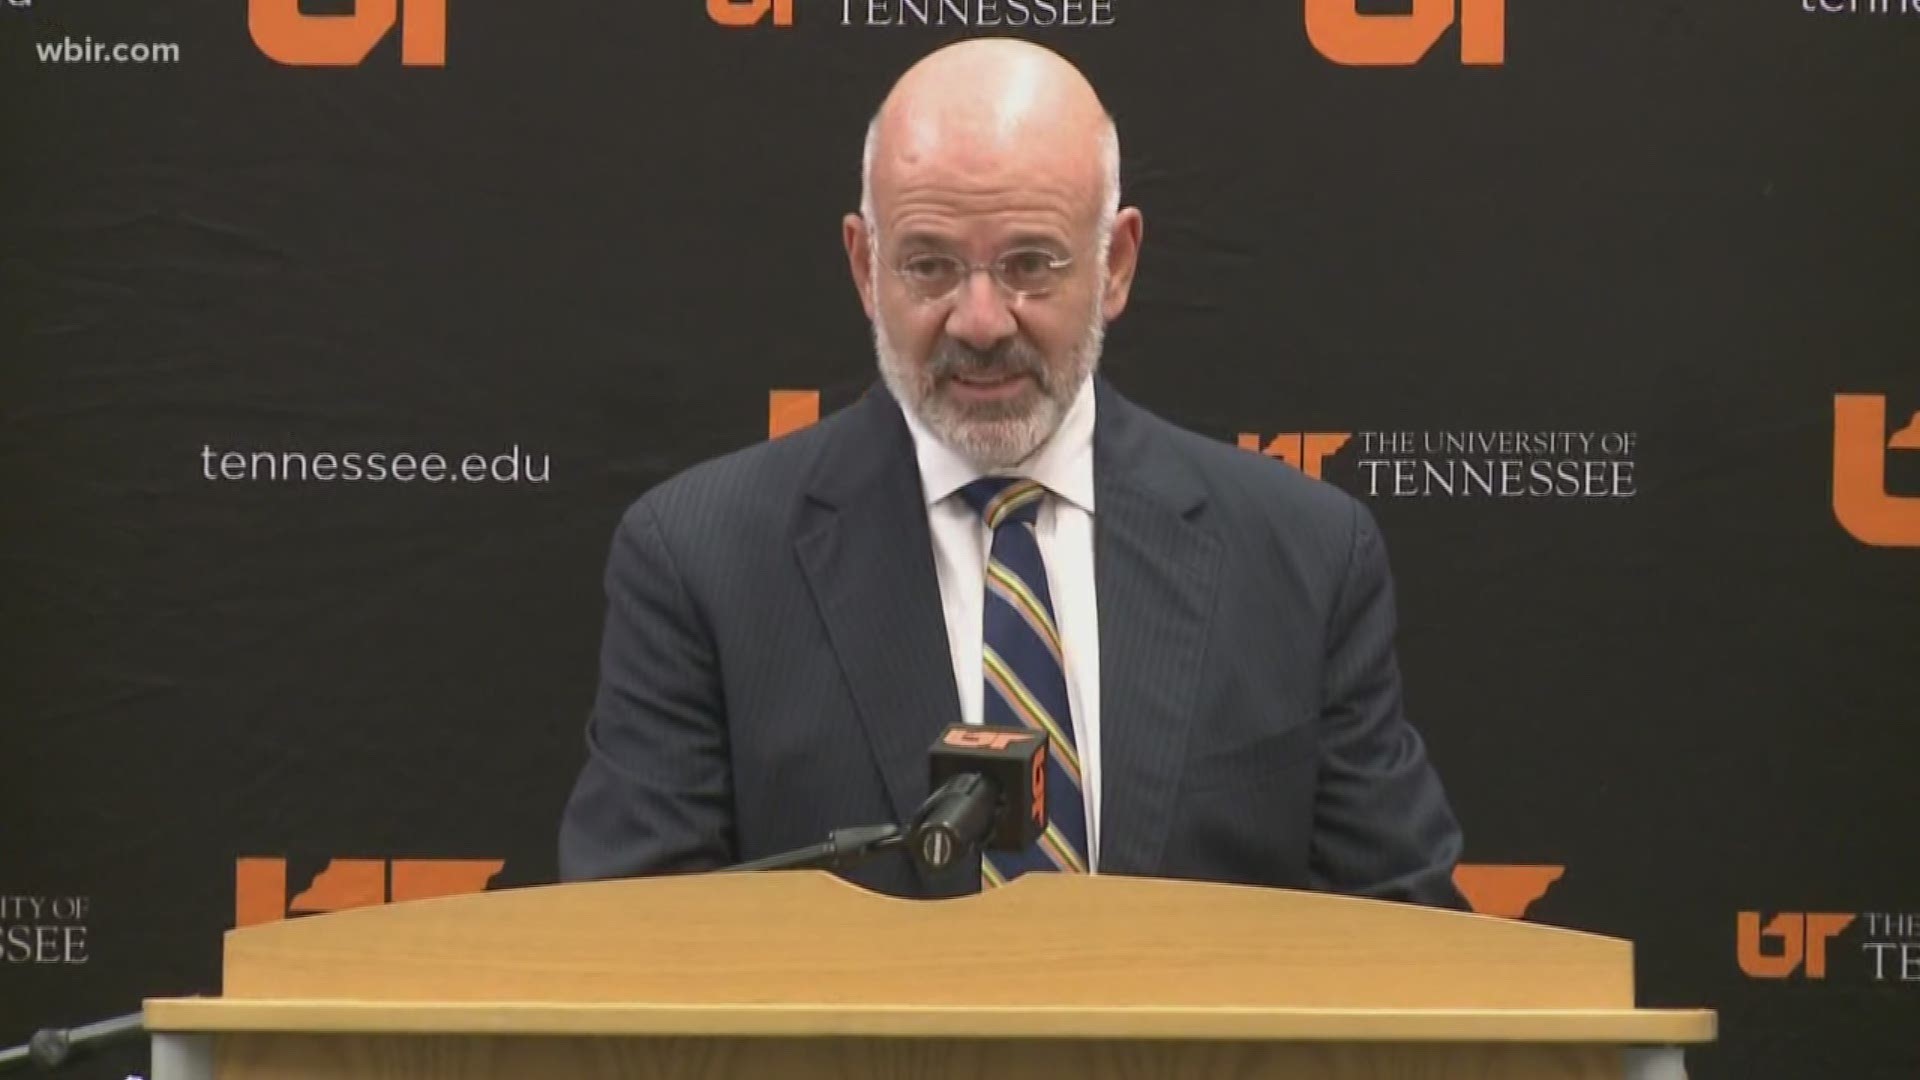 DiPietro is the 25th president of the University of Tennessee system. He will step down in November with a retirement date effective in February 2019,